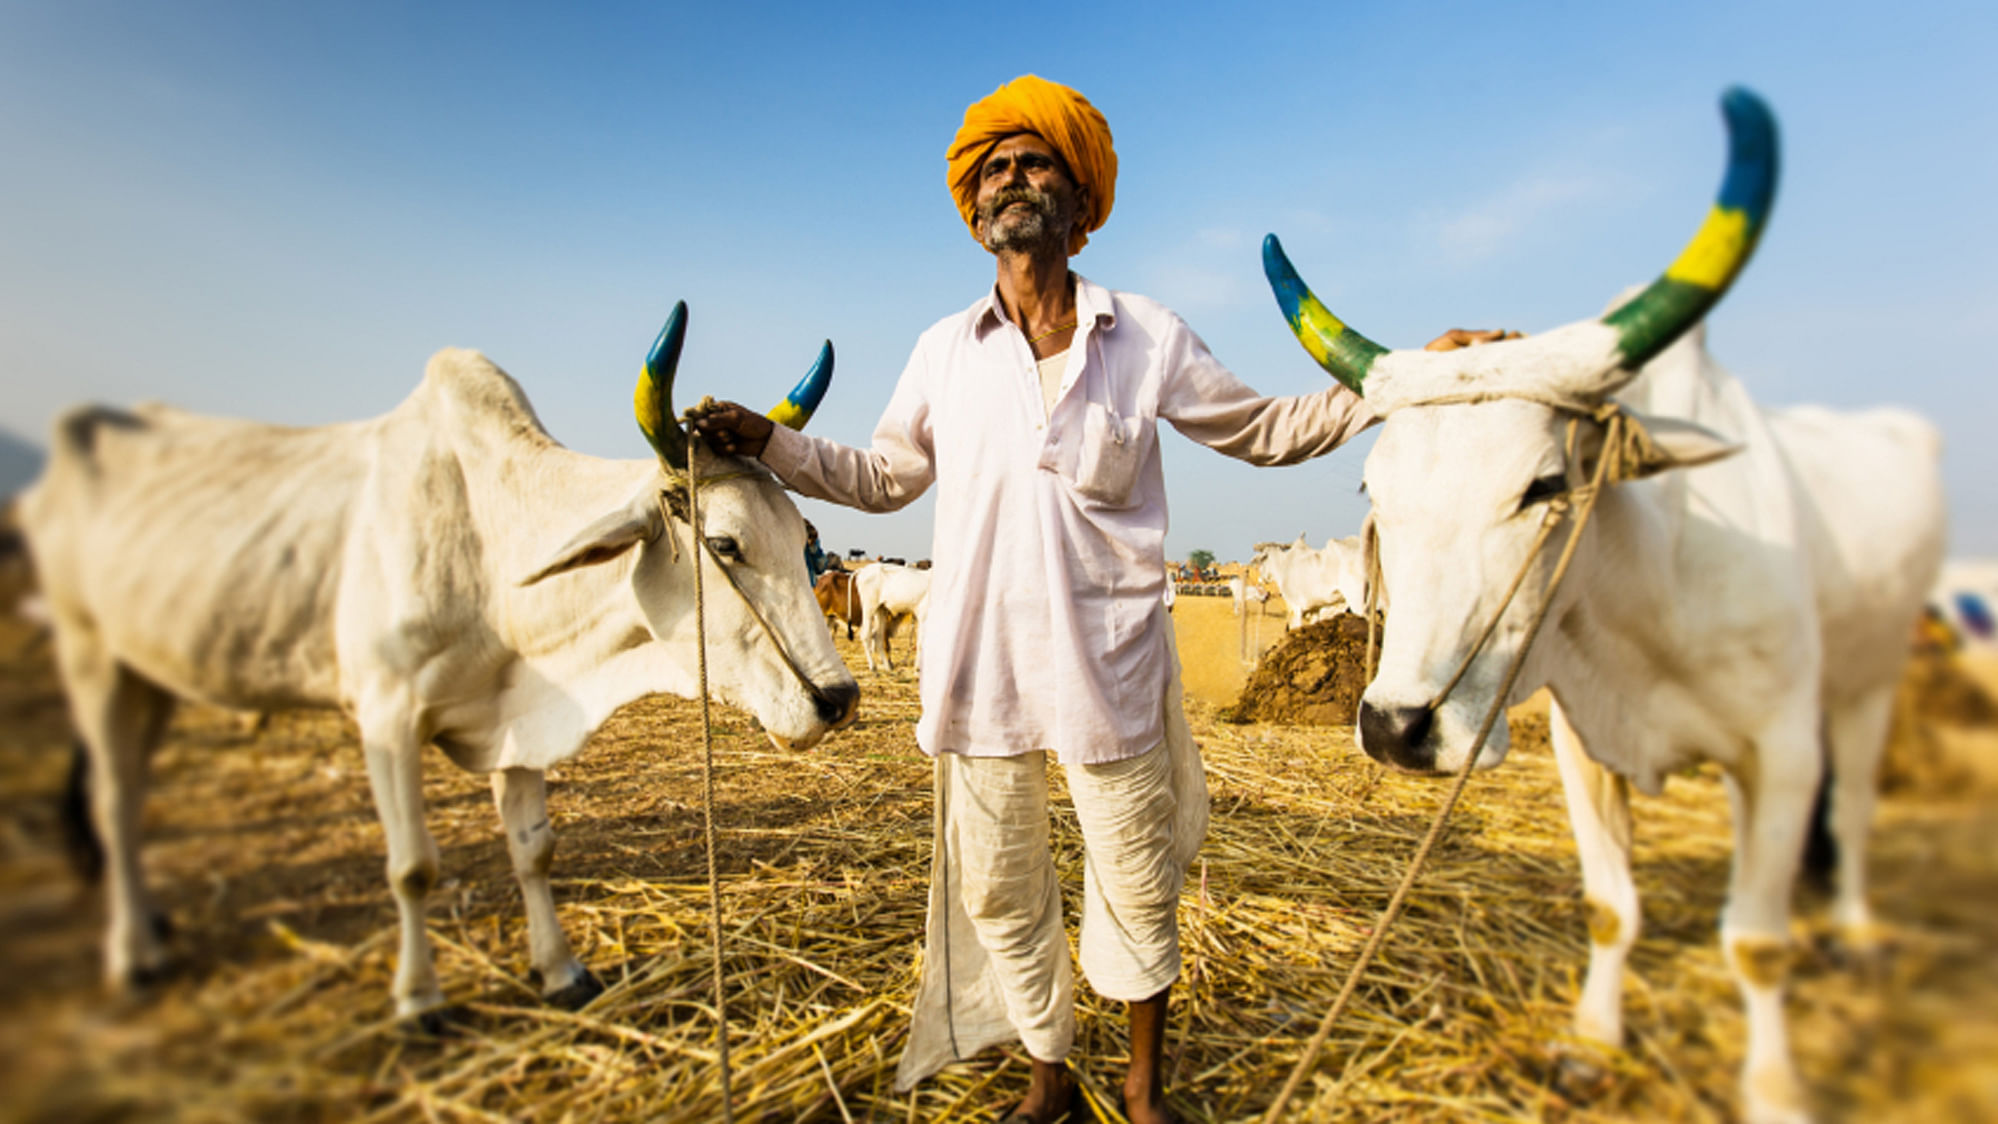 The beef ban in many states has been most farmer-unfriendly. (Photo: iStock)